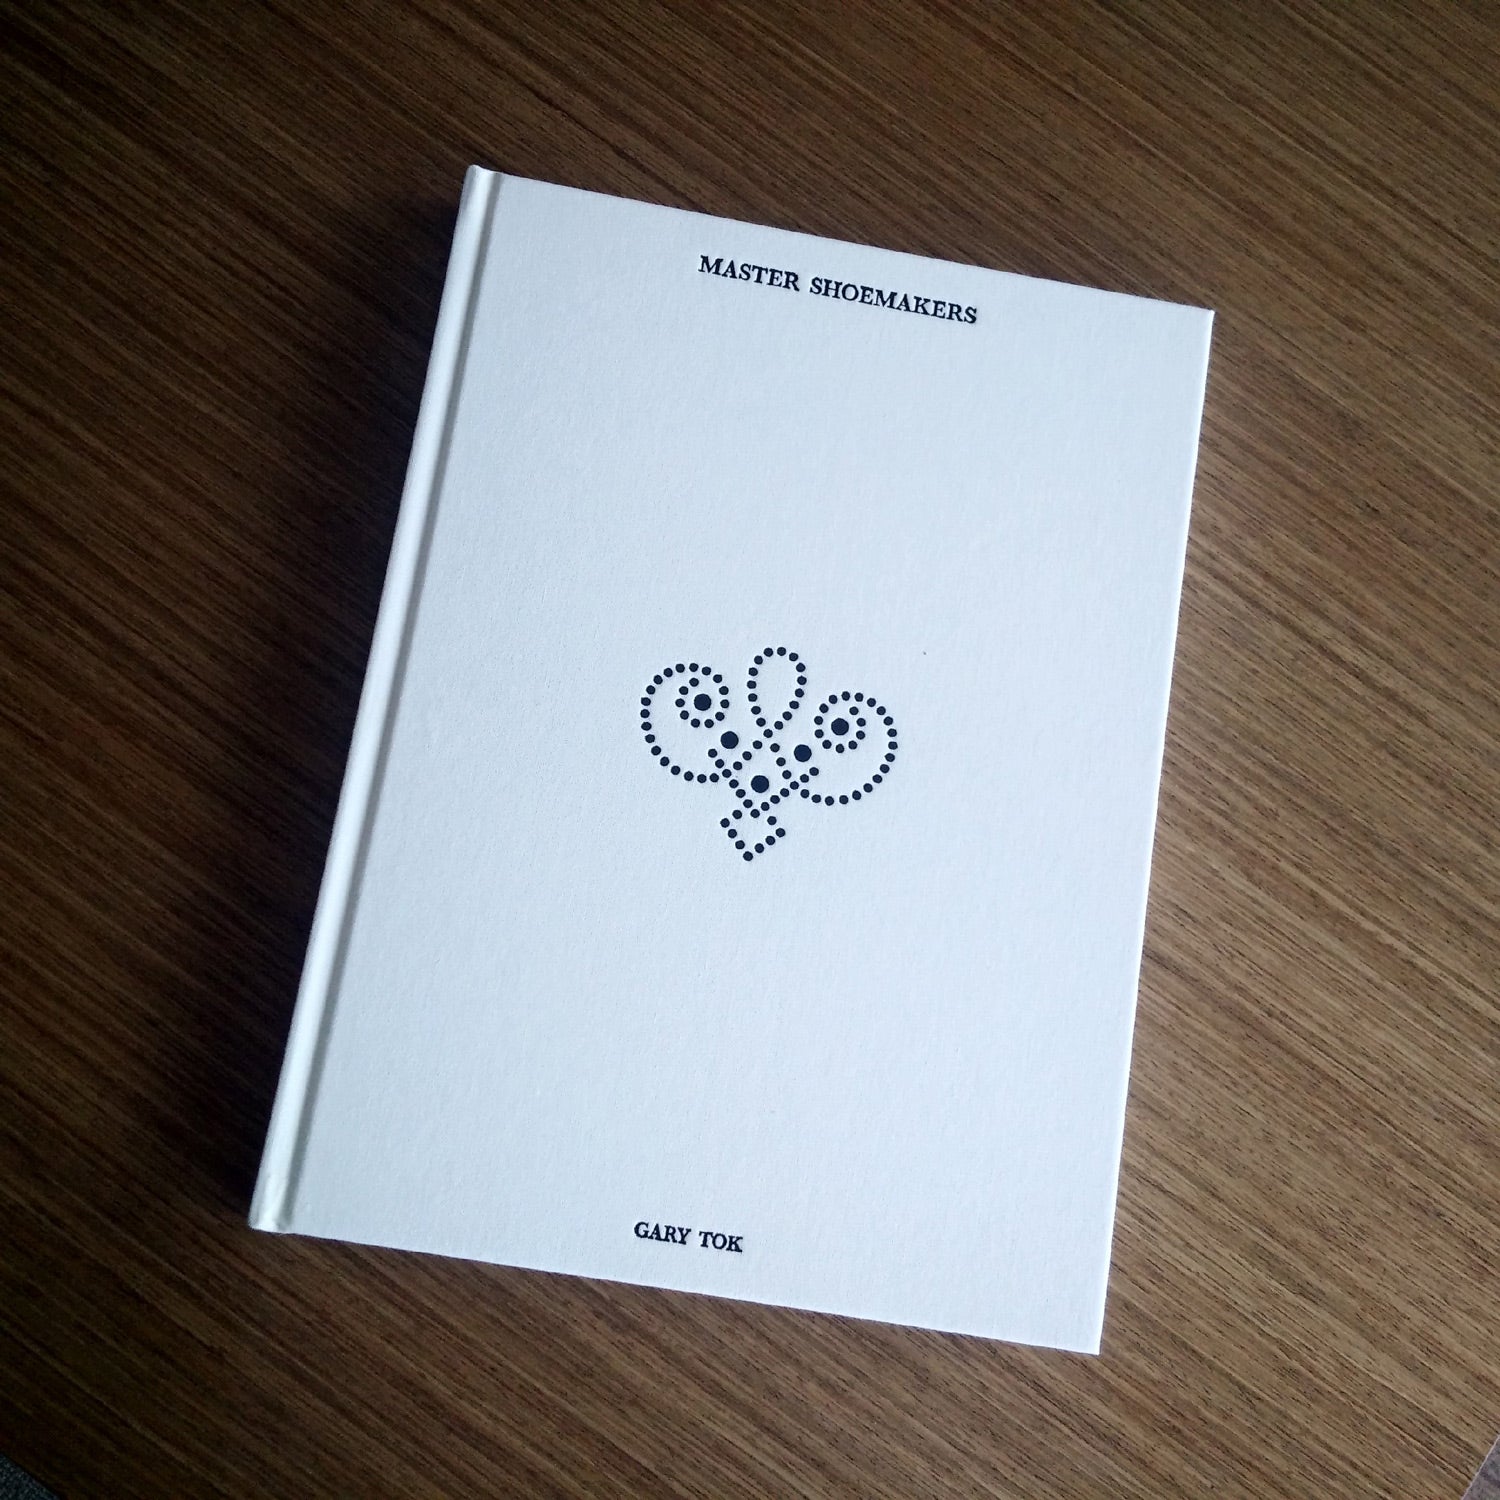 A "Master Shoemakers: The Art and Soul of Bespoke Shoes" book with a drawing of a flower on it.